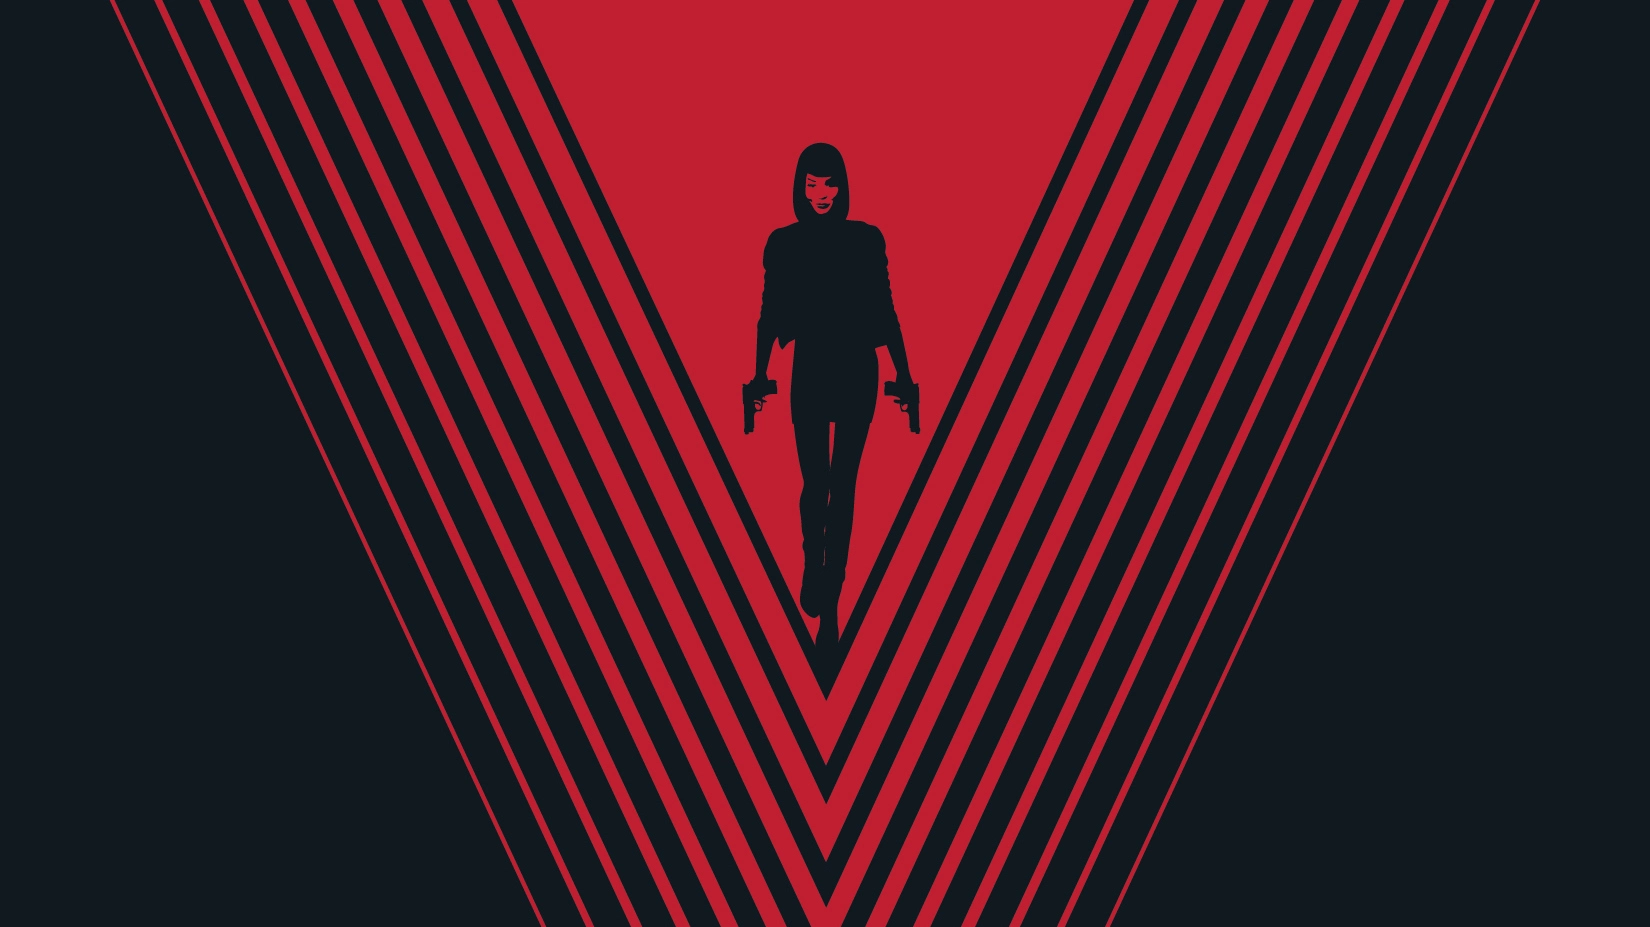 A cropped section of the cover of V. E. Schwab's "Vengeful" depicts a blood-red background with angled black sections forming a "V." In the center of the "V," a woman walking forward wit ha gun in each hand.